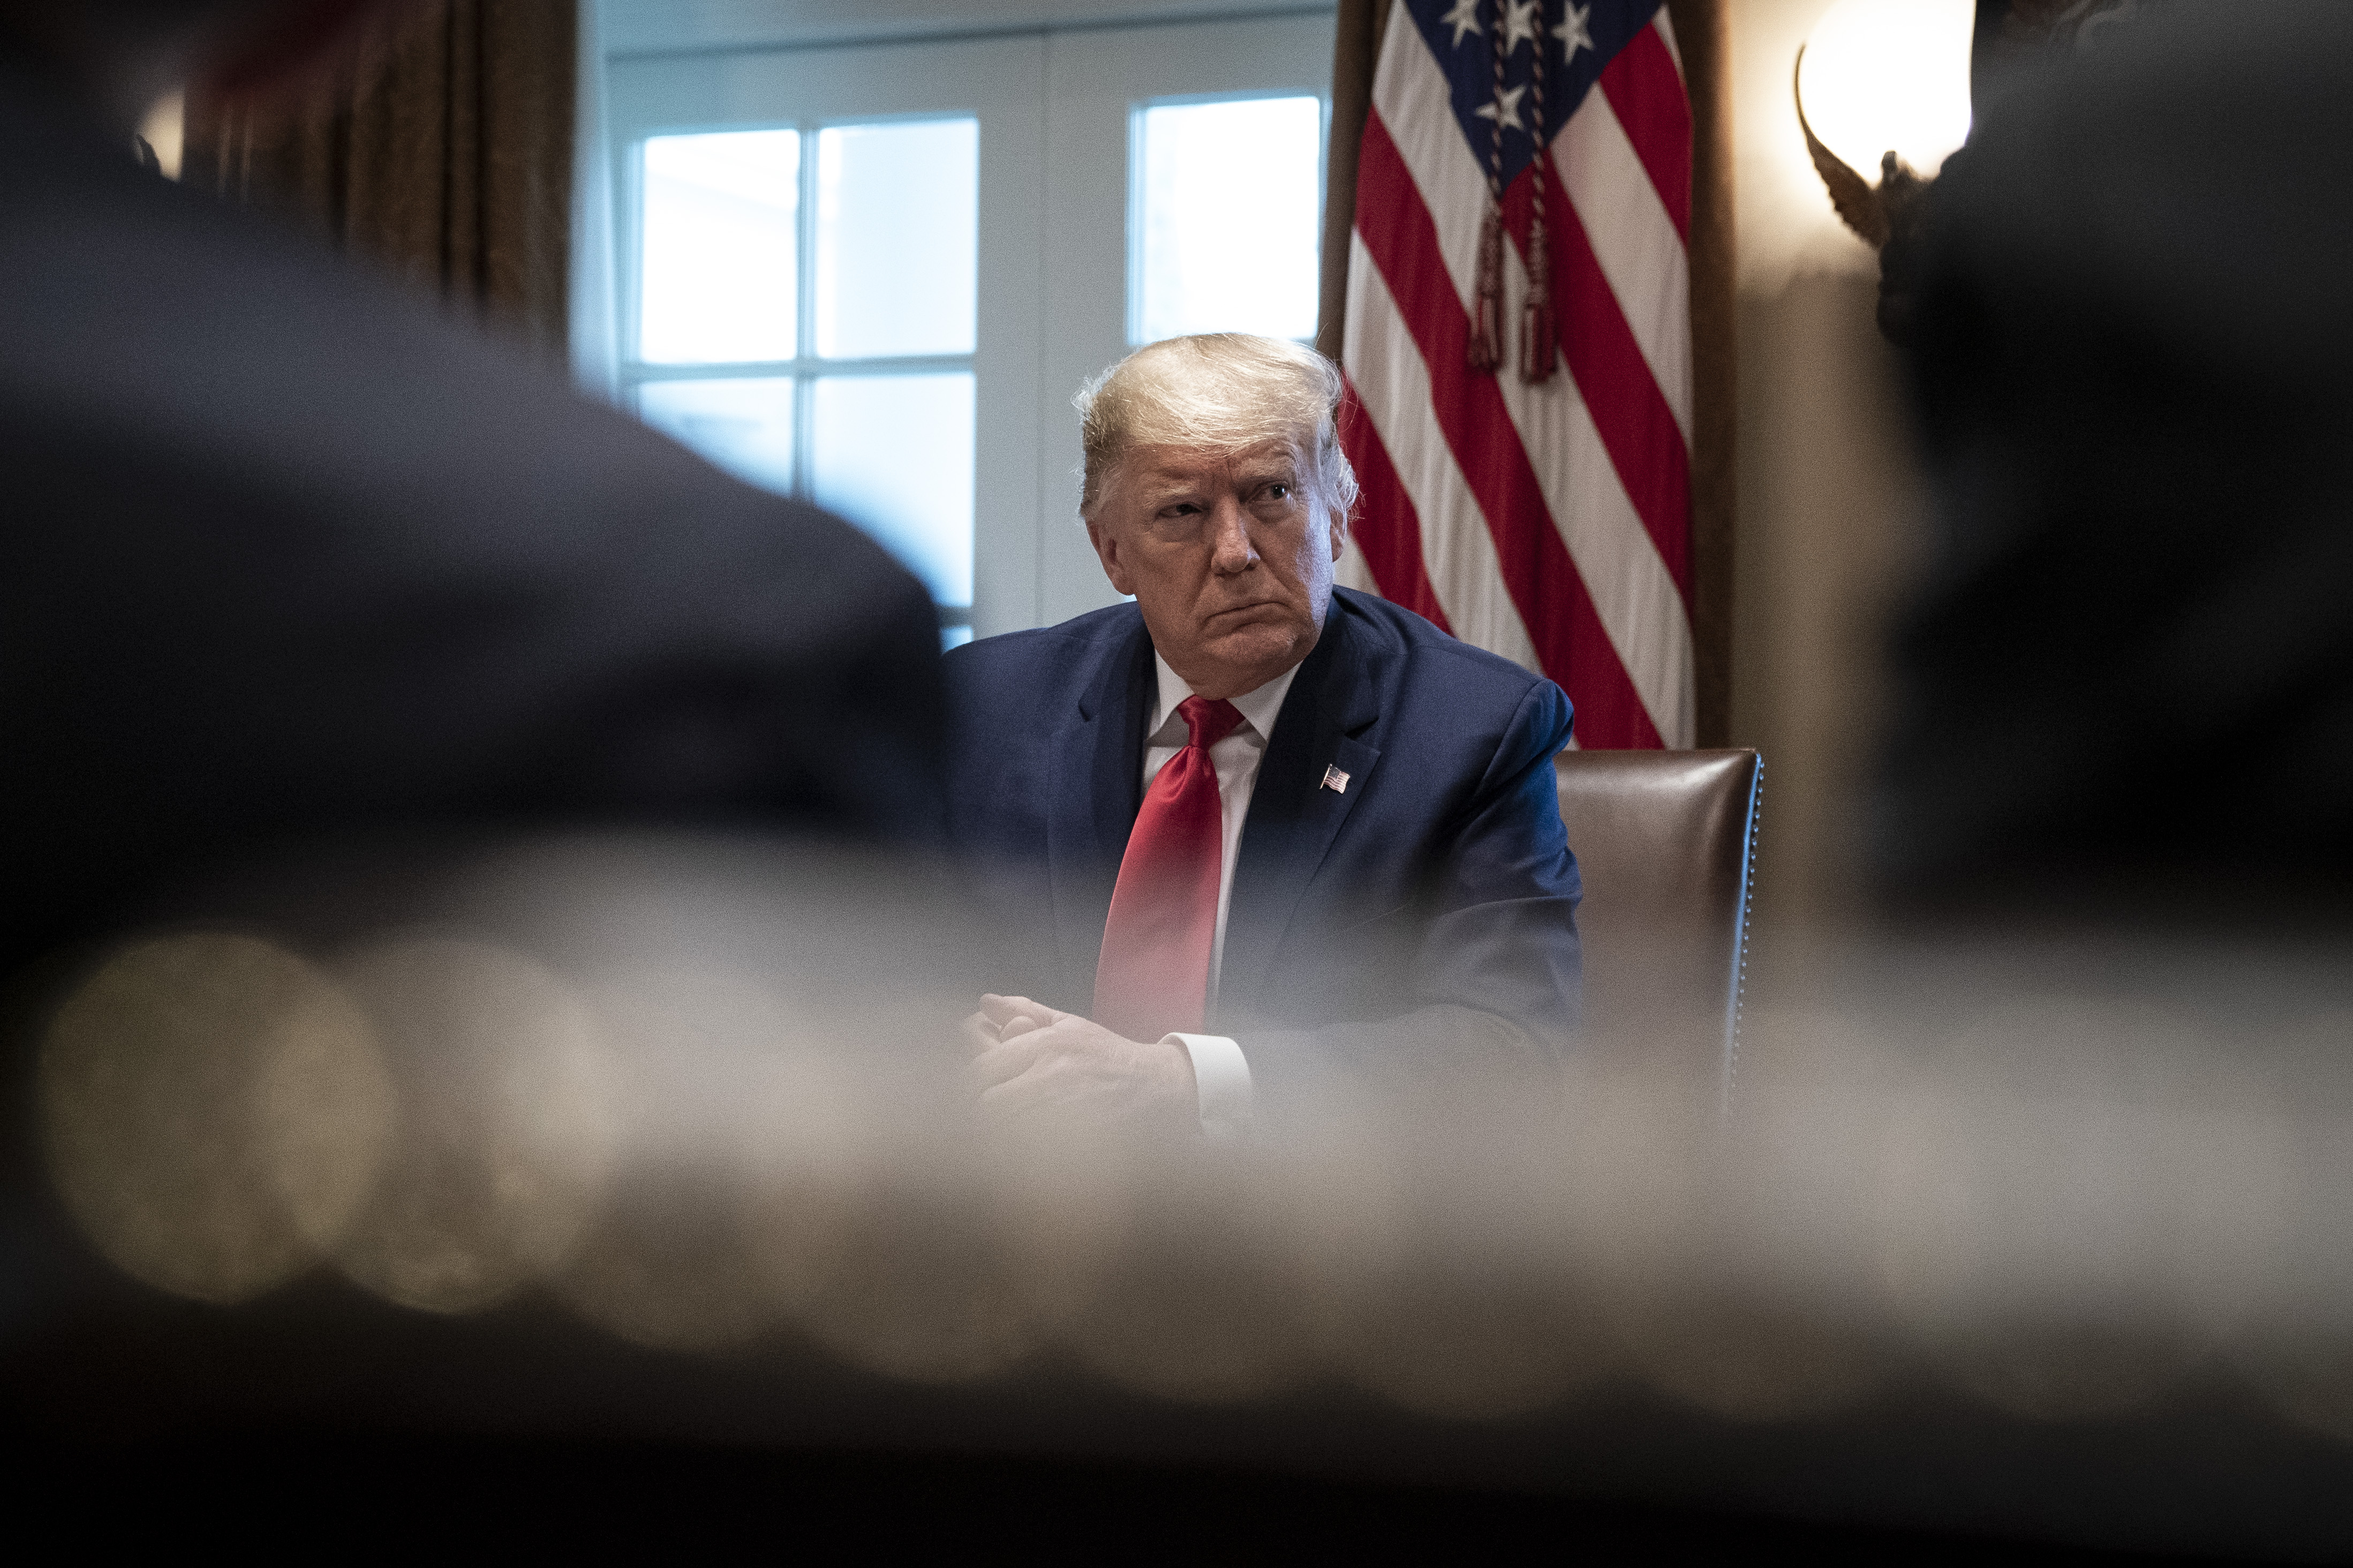 President Donald Trump leads a meeting with the White House Coronavirus Task Force on March 2, 2020 in Washington, D.C. (Drew Angerer—Getty Images)